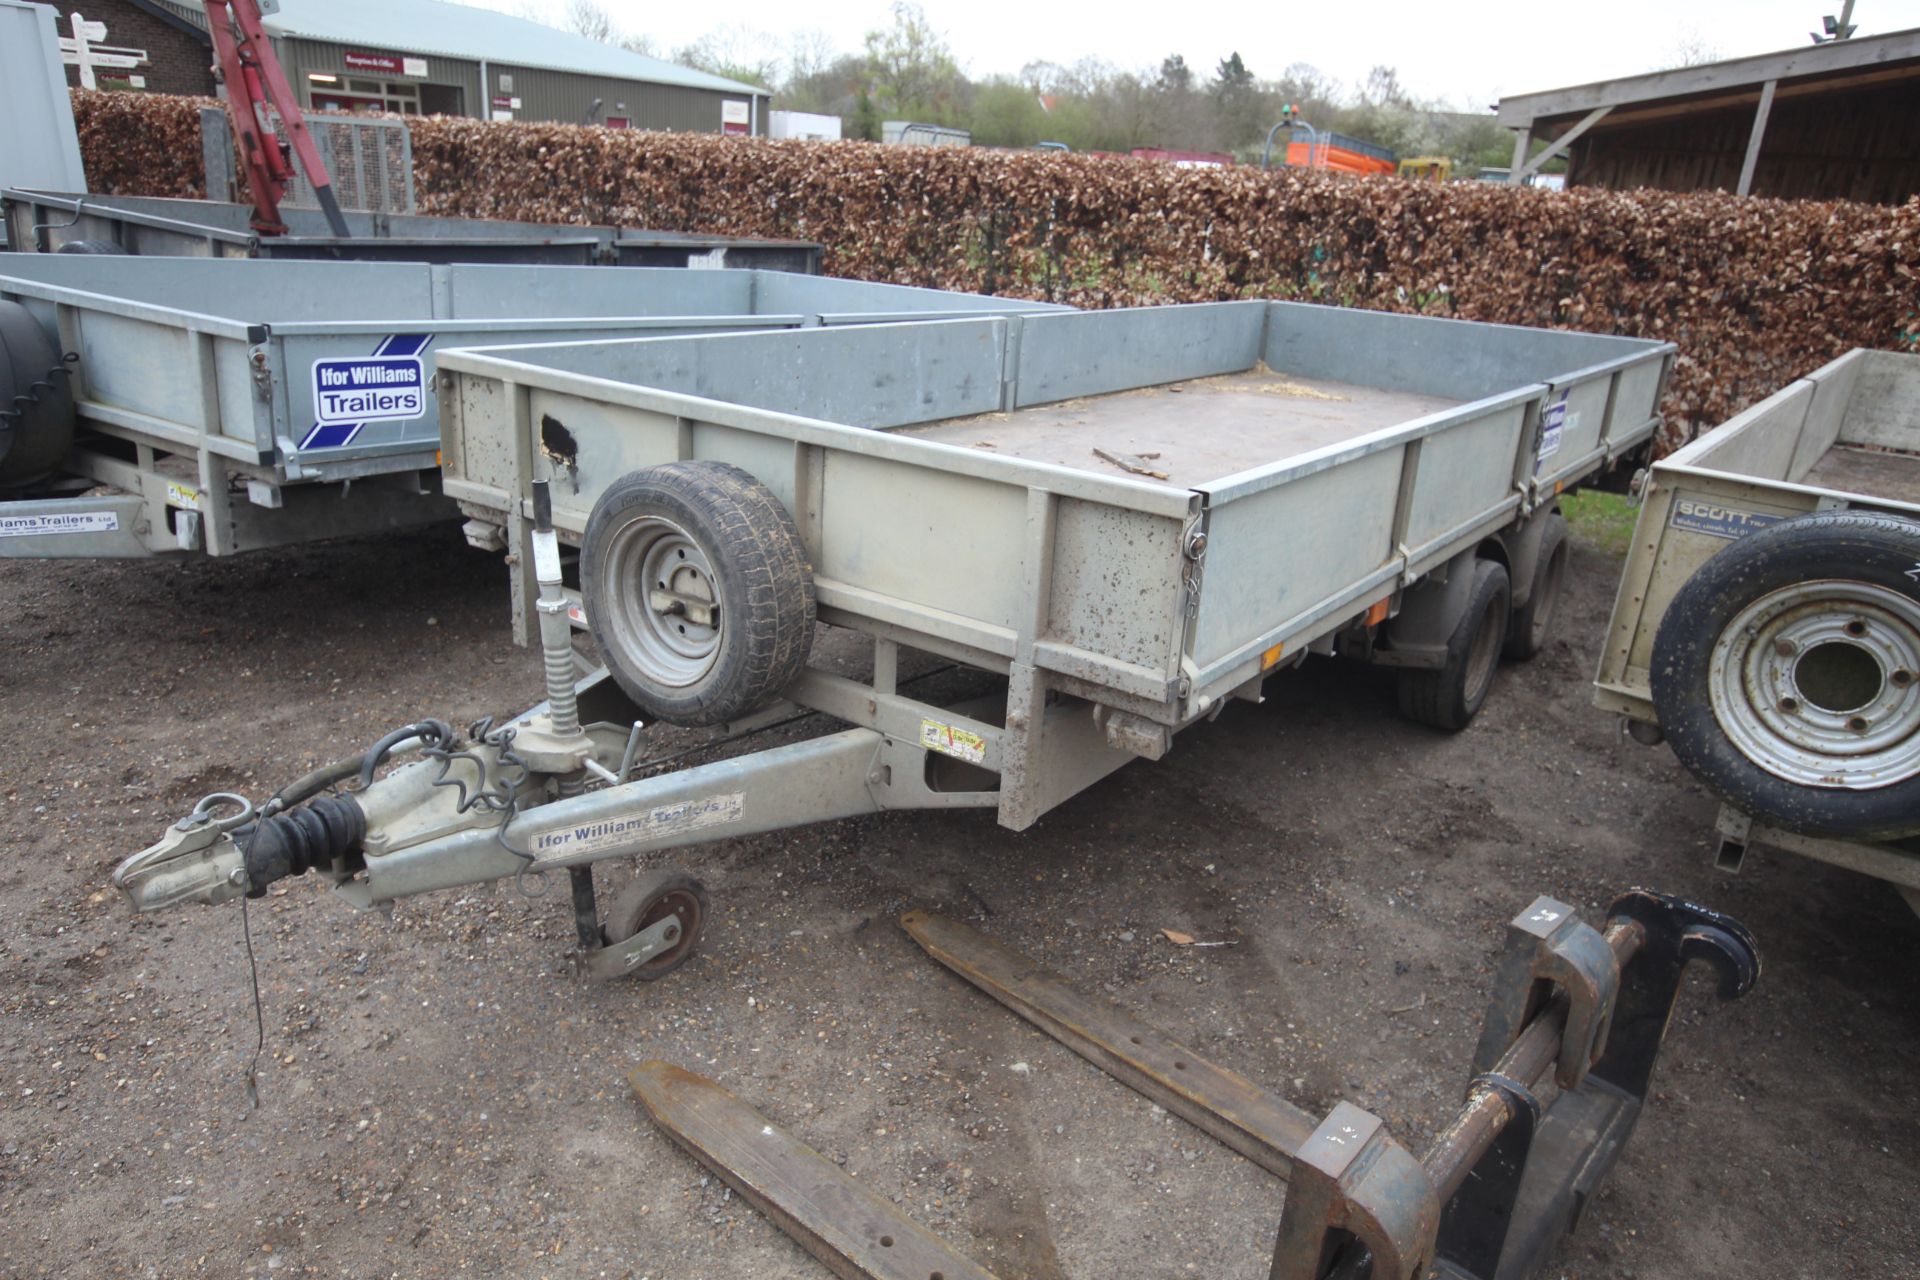 Ifor Williams 16ft twin axle flat bed trailer. With sides. V